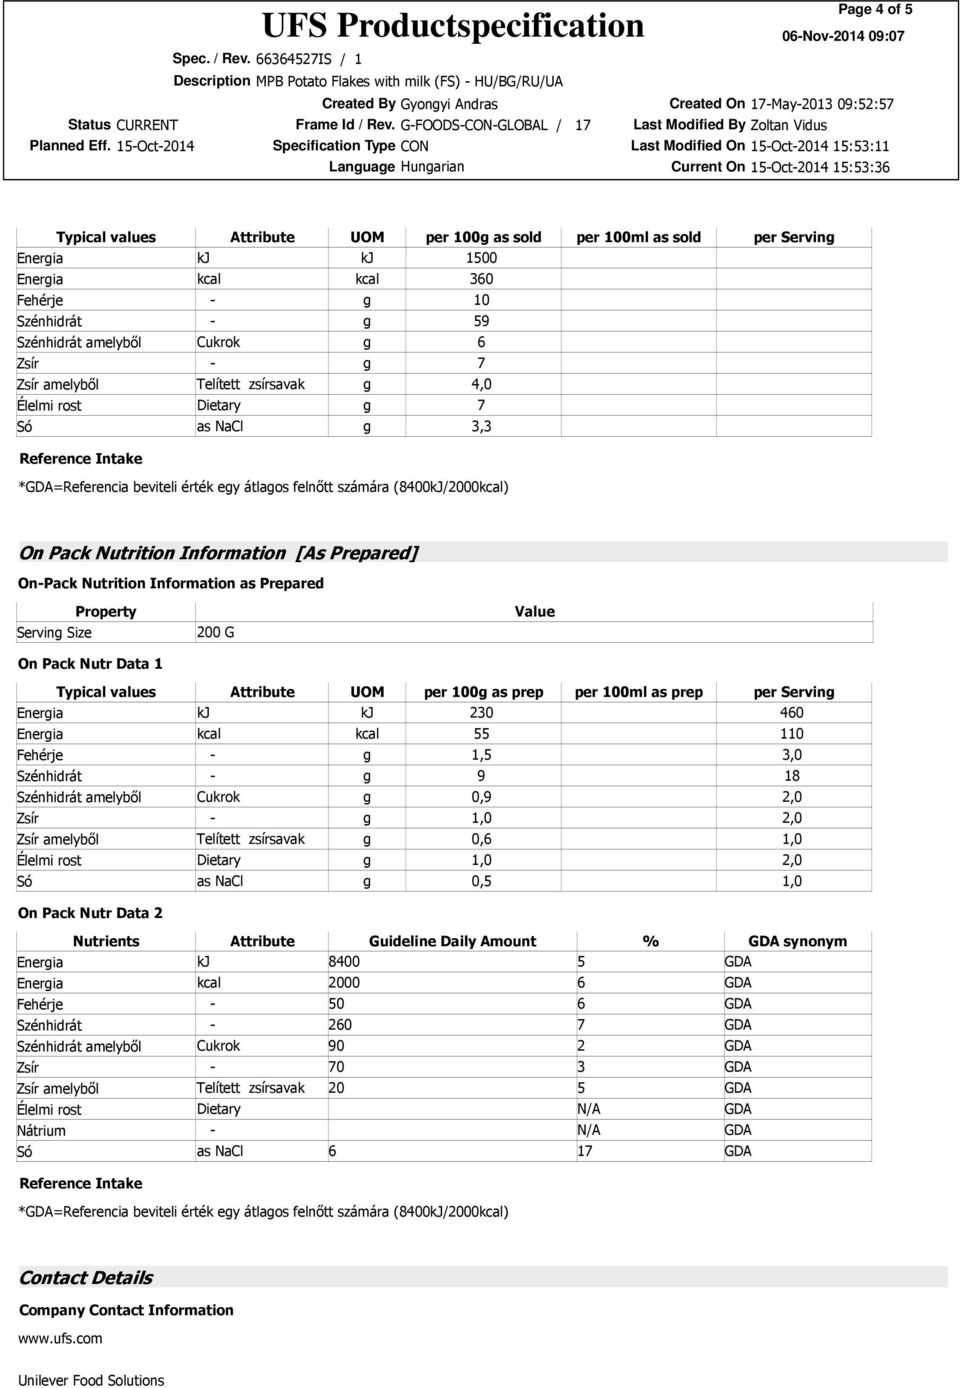 Information [As Prepared] On-Pack Nutrition Information as Prepared Serving Size On Pack Nutr Data 1 200 G Value Typical values Attribute UOM per 100g as prep per 100ml as prep per Serving Energia kj